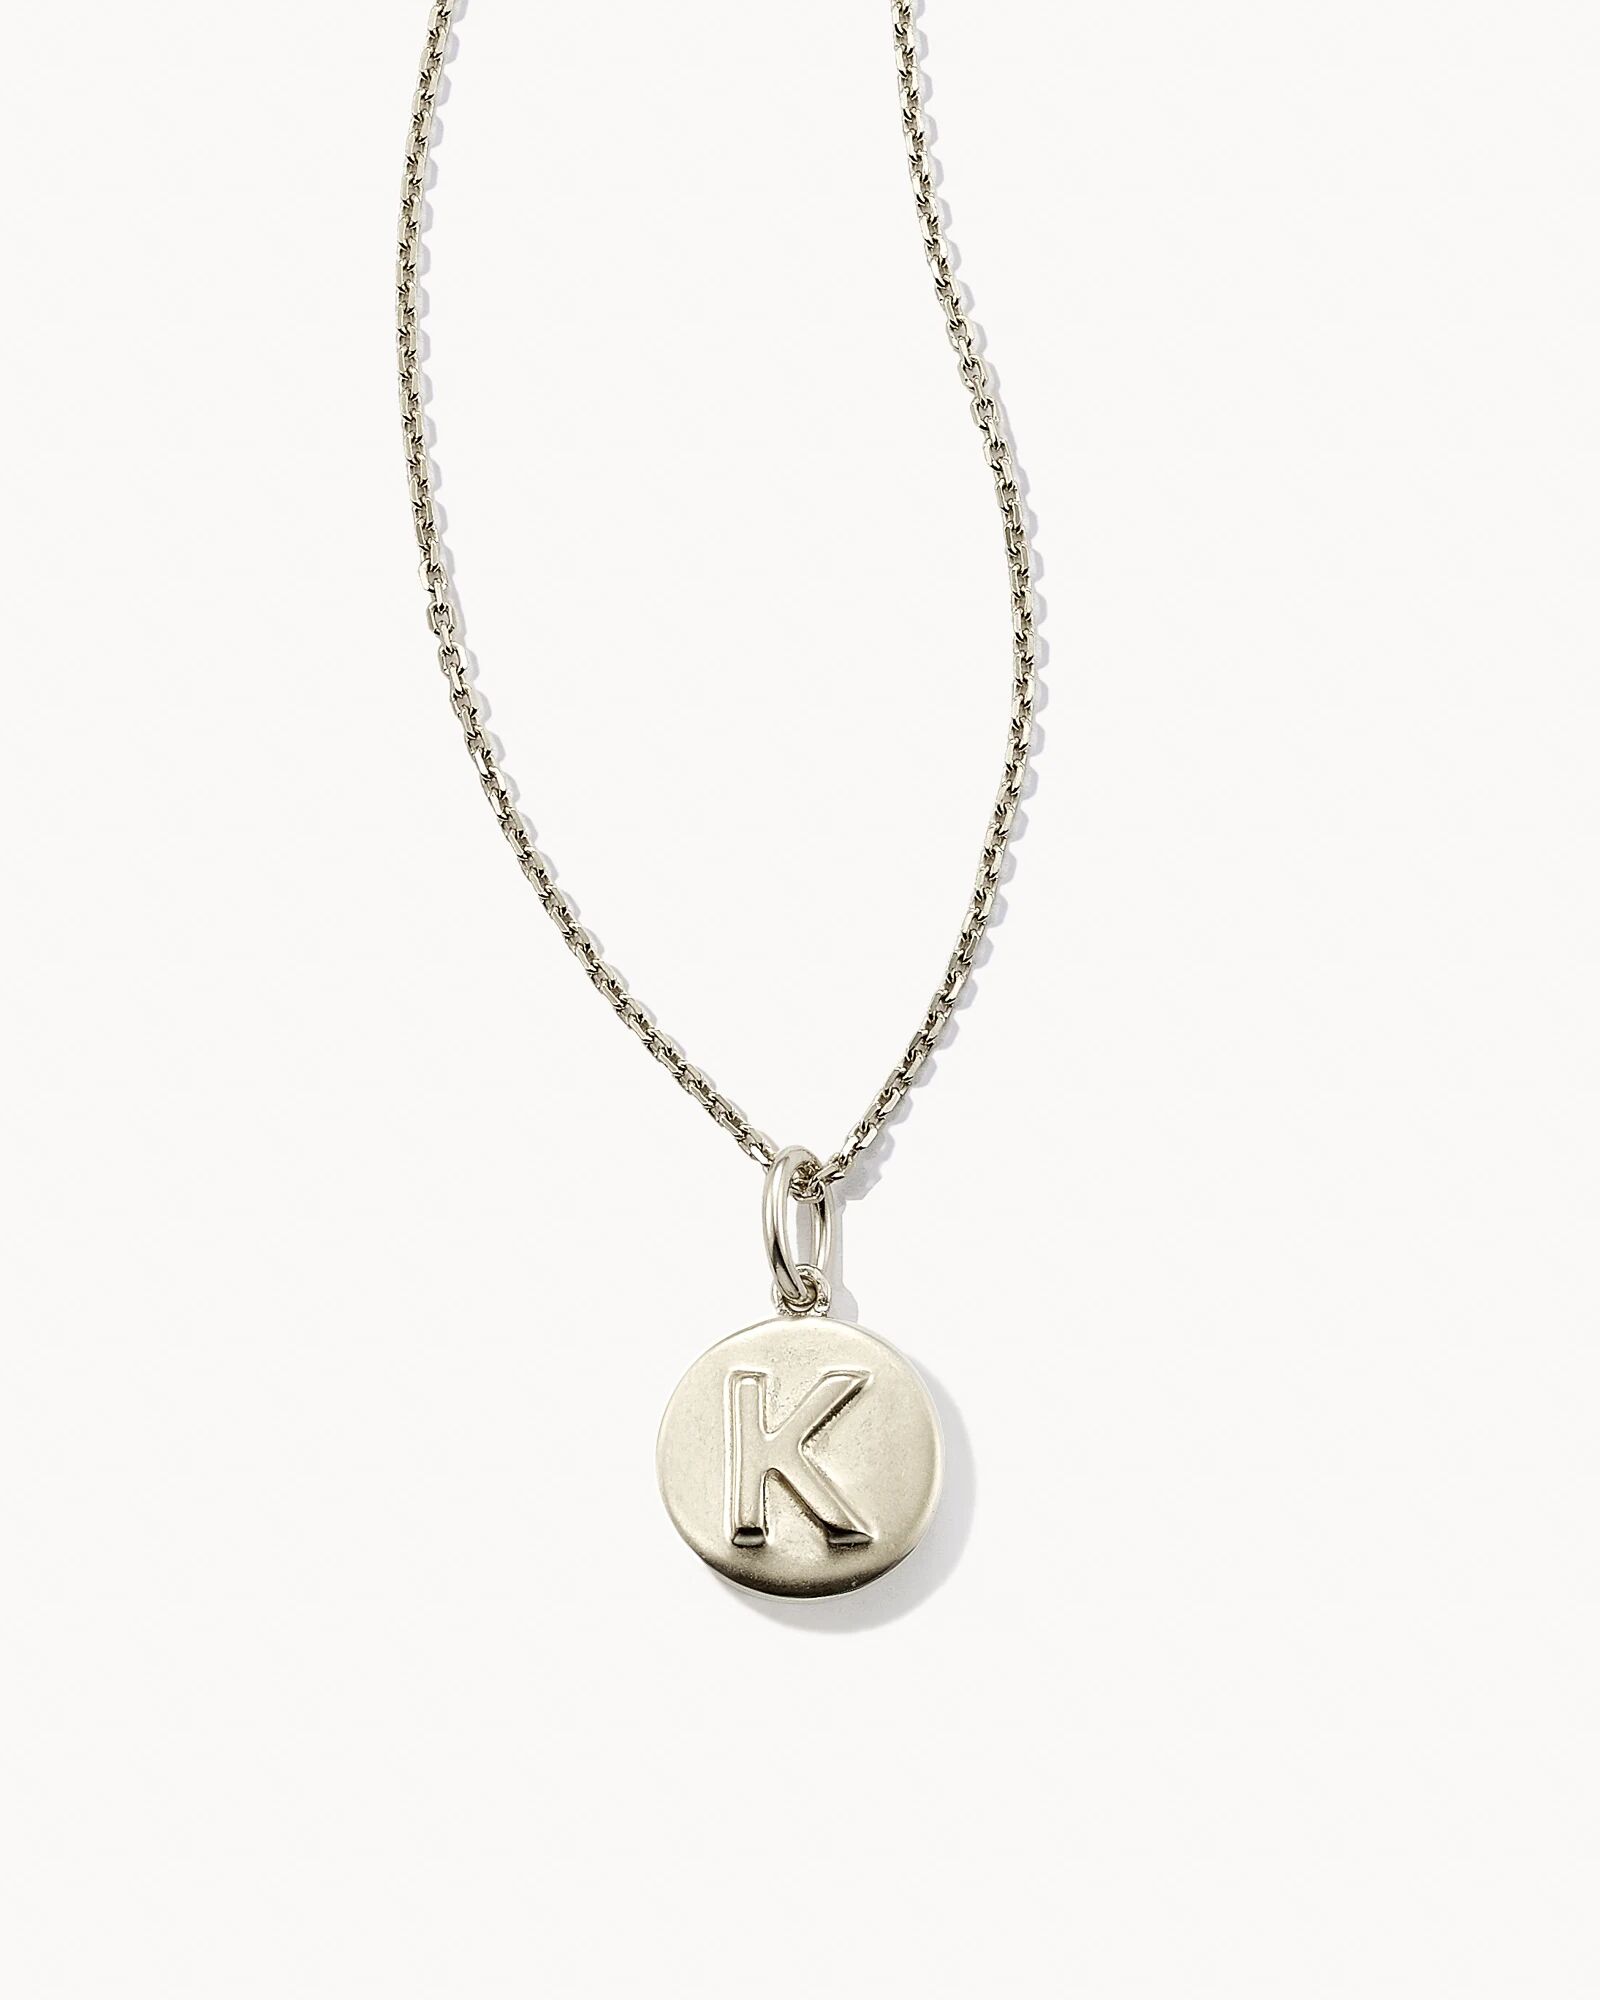 Kendra Scott Letter K Coin Pendant Necklace in Oxidized Sterling Silver   Metal